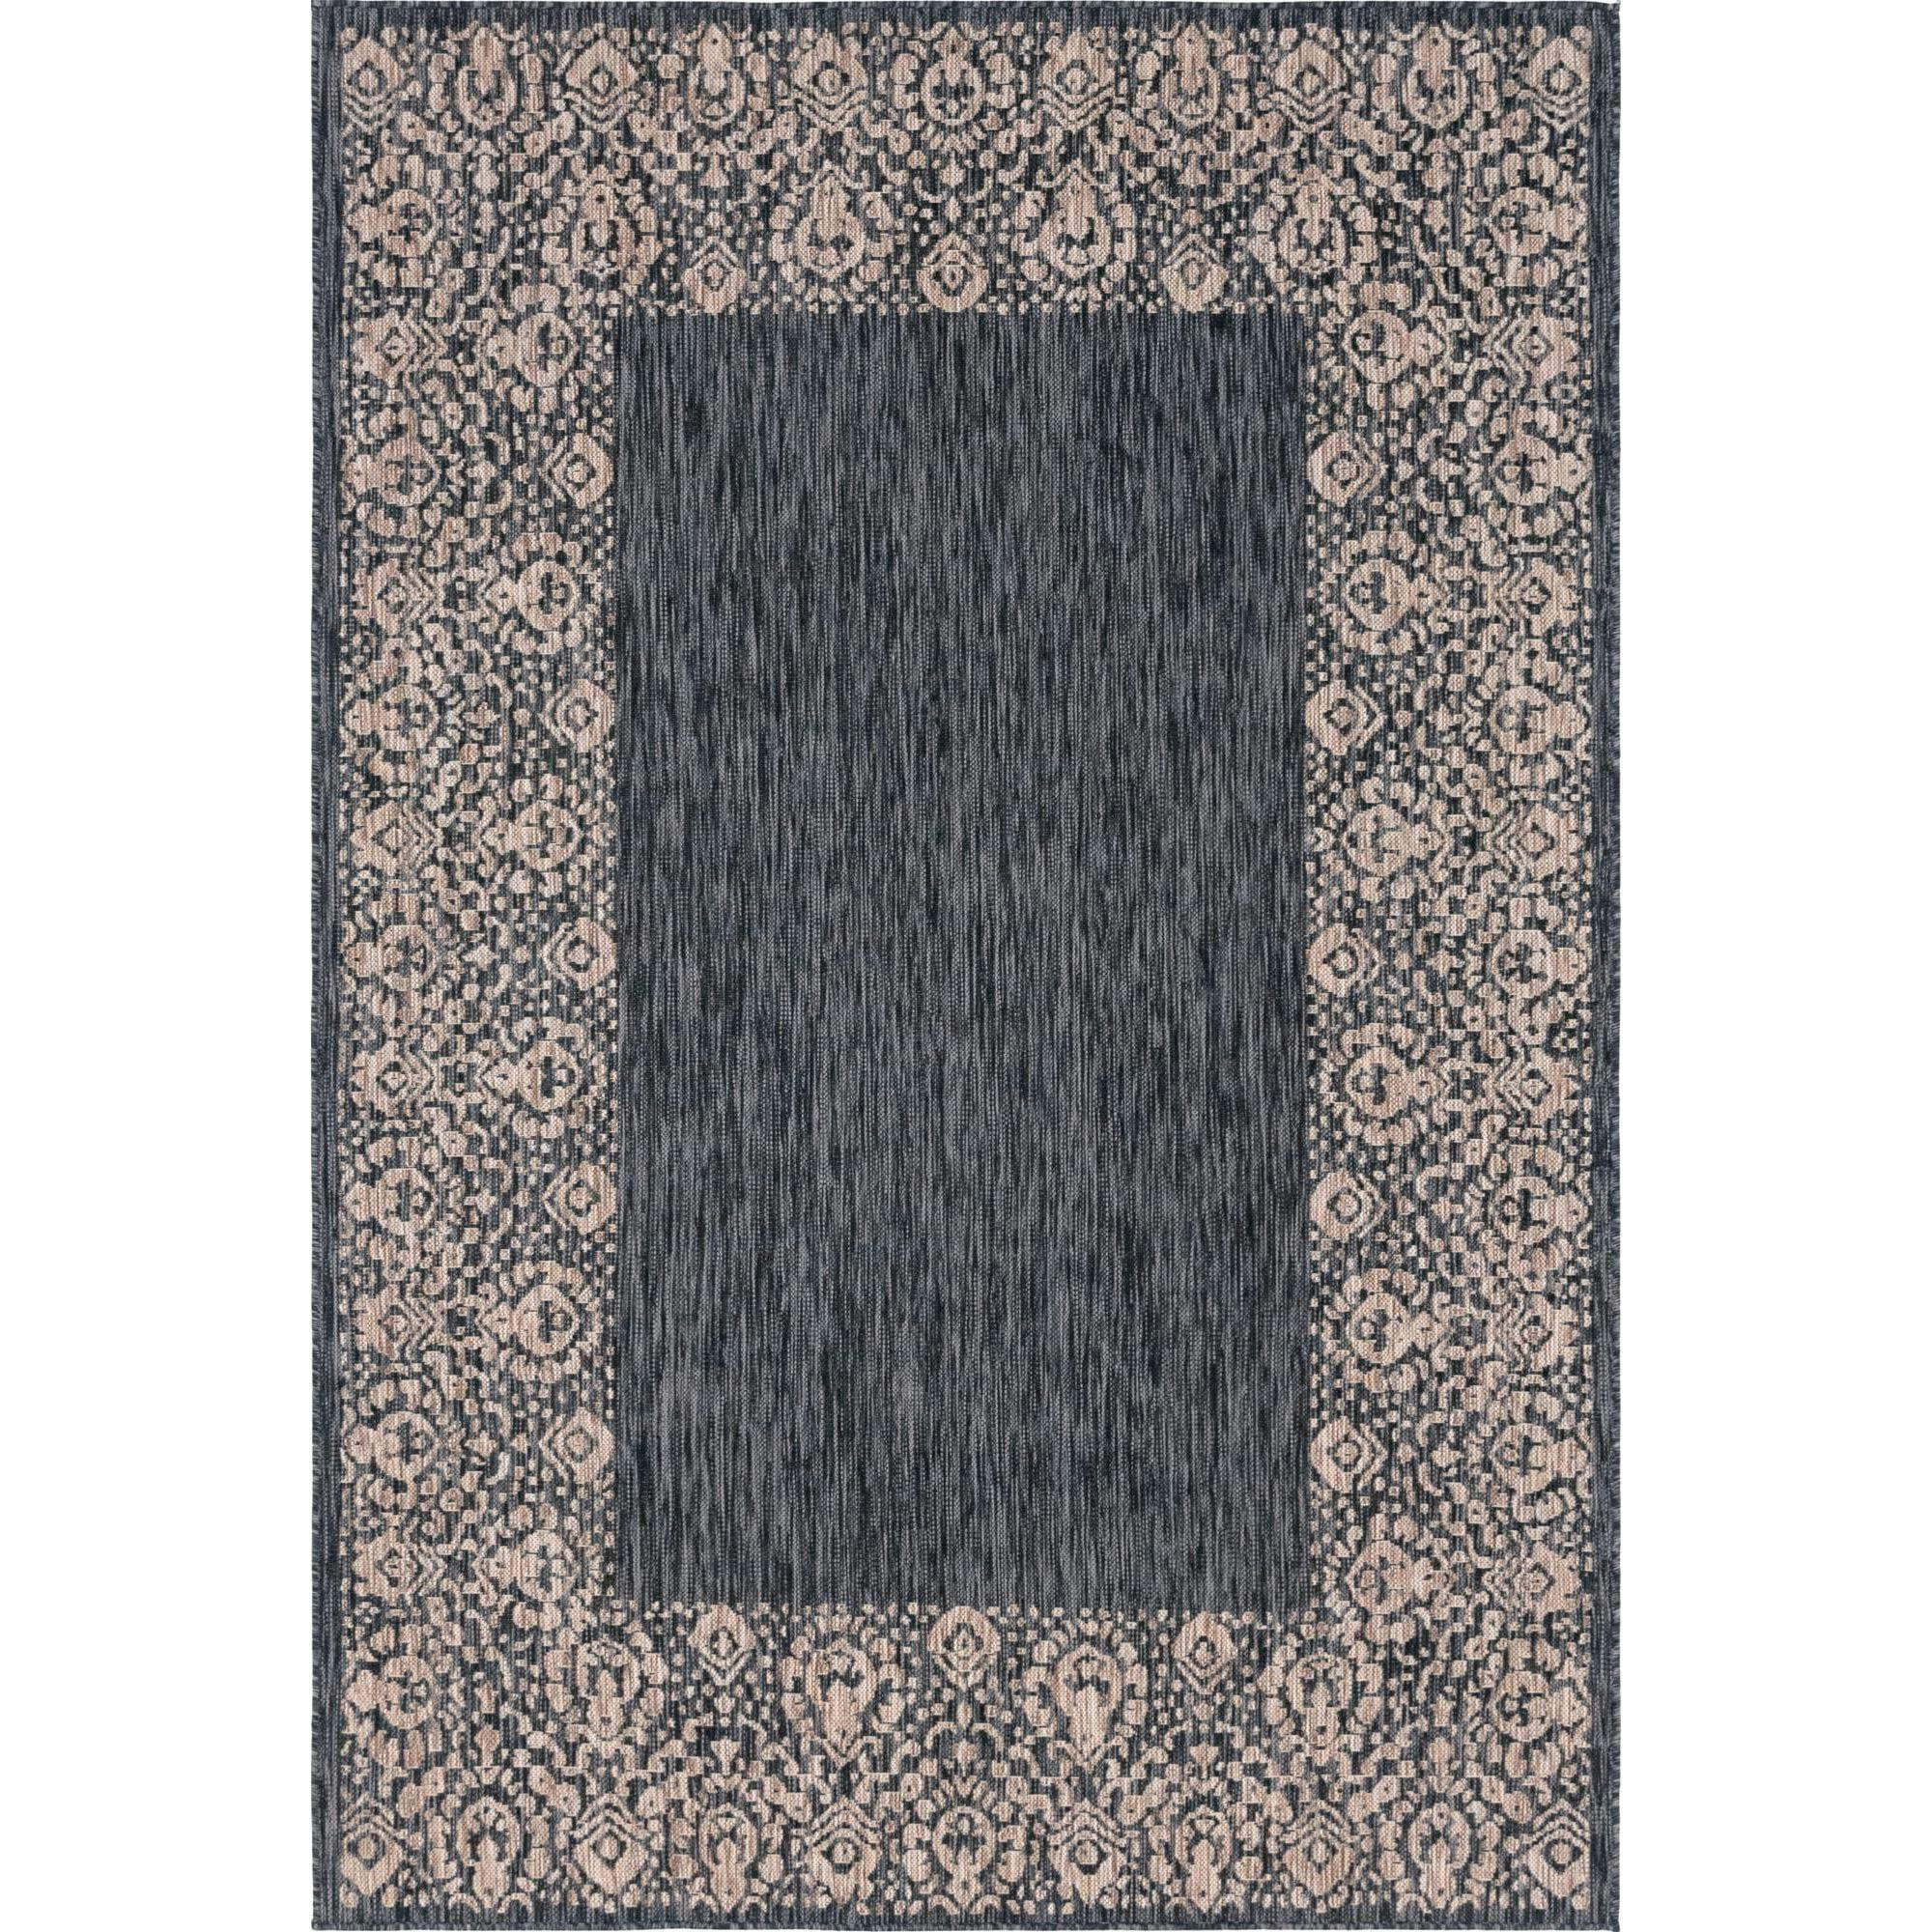 Charcoal Gray Easy-Care Rectangular Outdoor Rug 6' x 9'